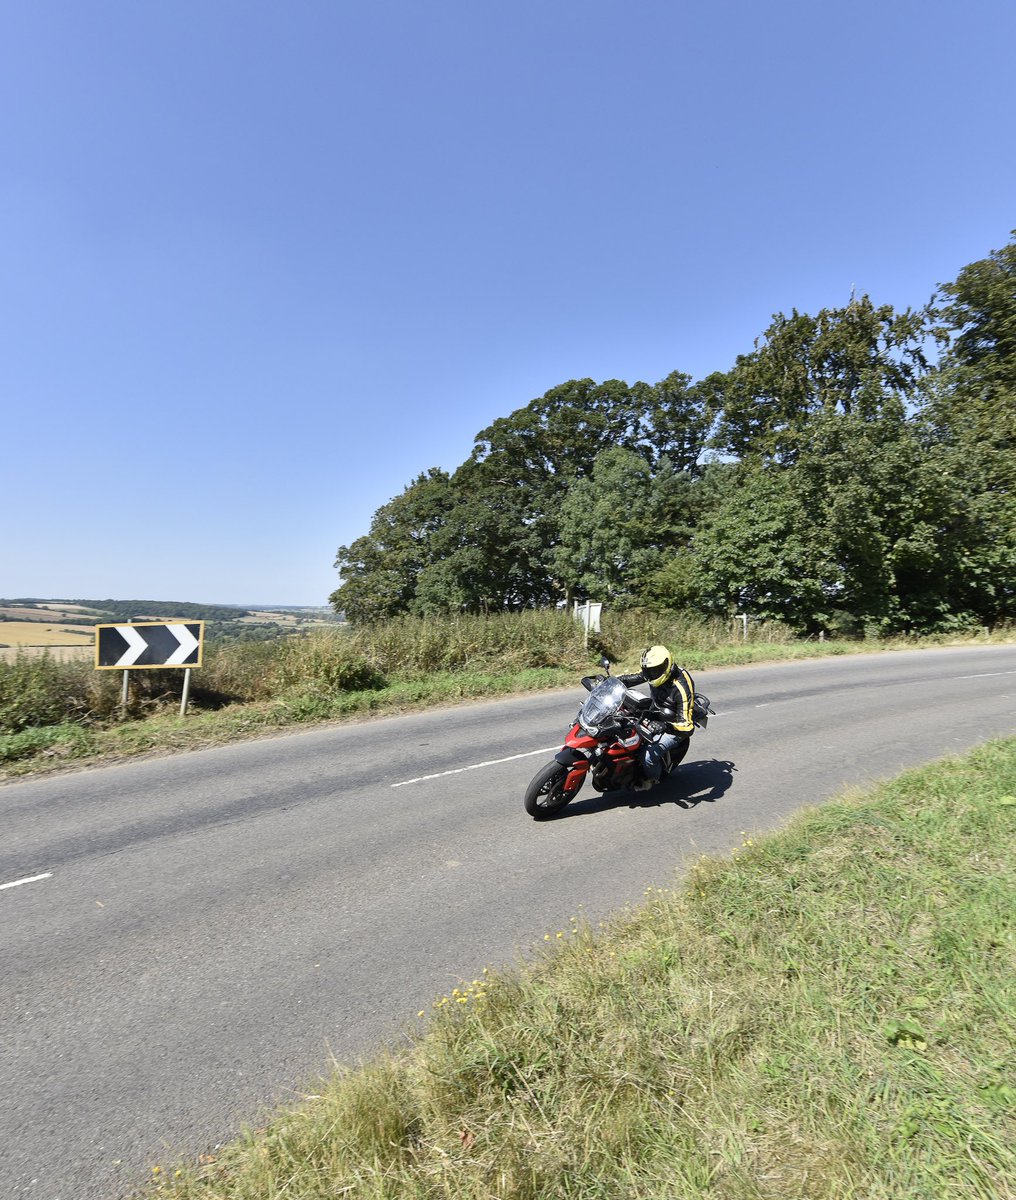 Something for the weekend? This week’s Route of the Week is a blinding break in the Cotswolds - the ideal way to start the summer! 📷 @markmanning simonweir.co.uk/routes #motorcycle #touring #mototour #Cotswolds #England #summer